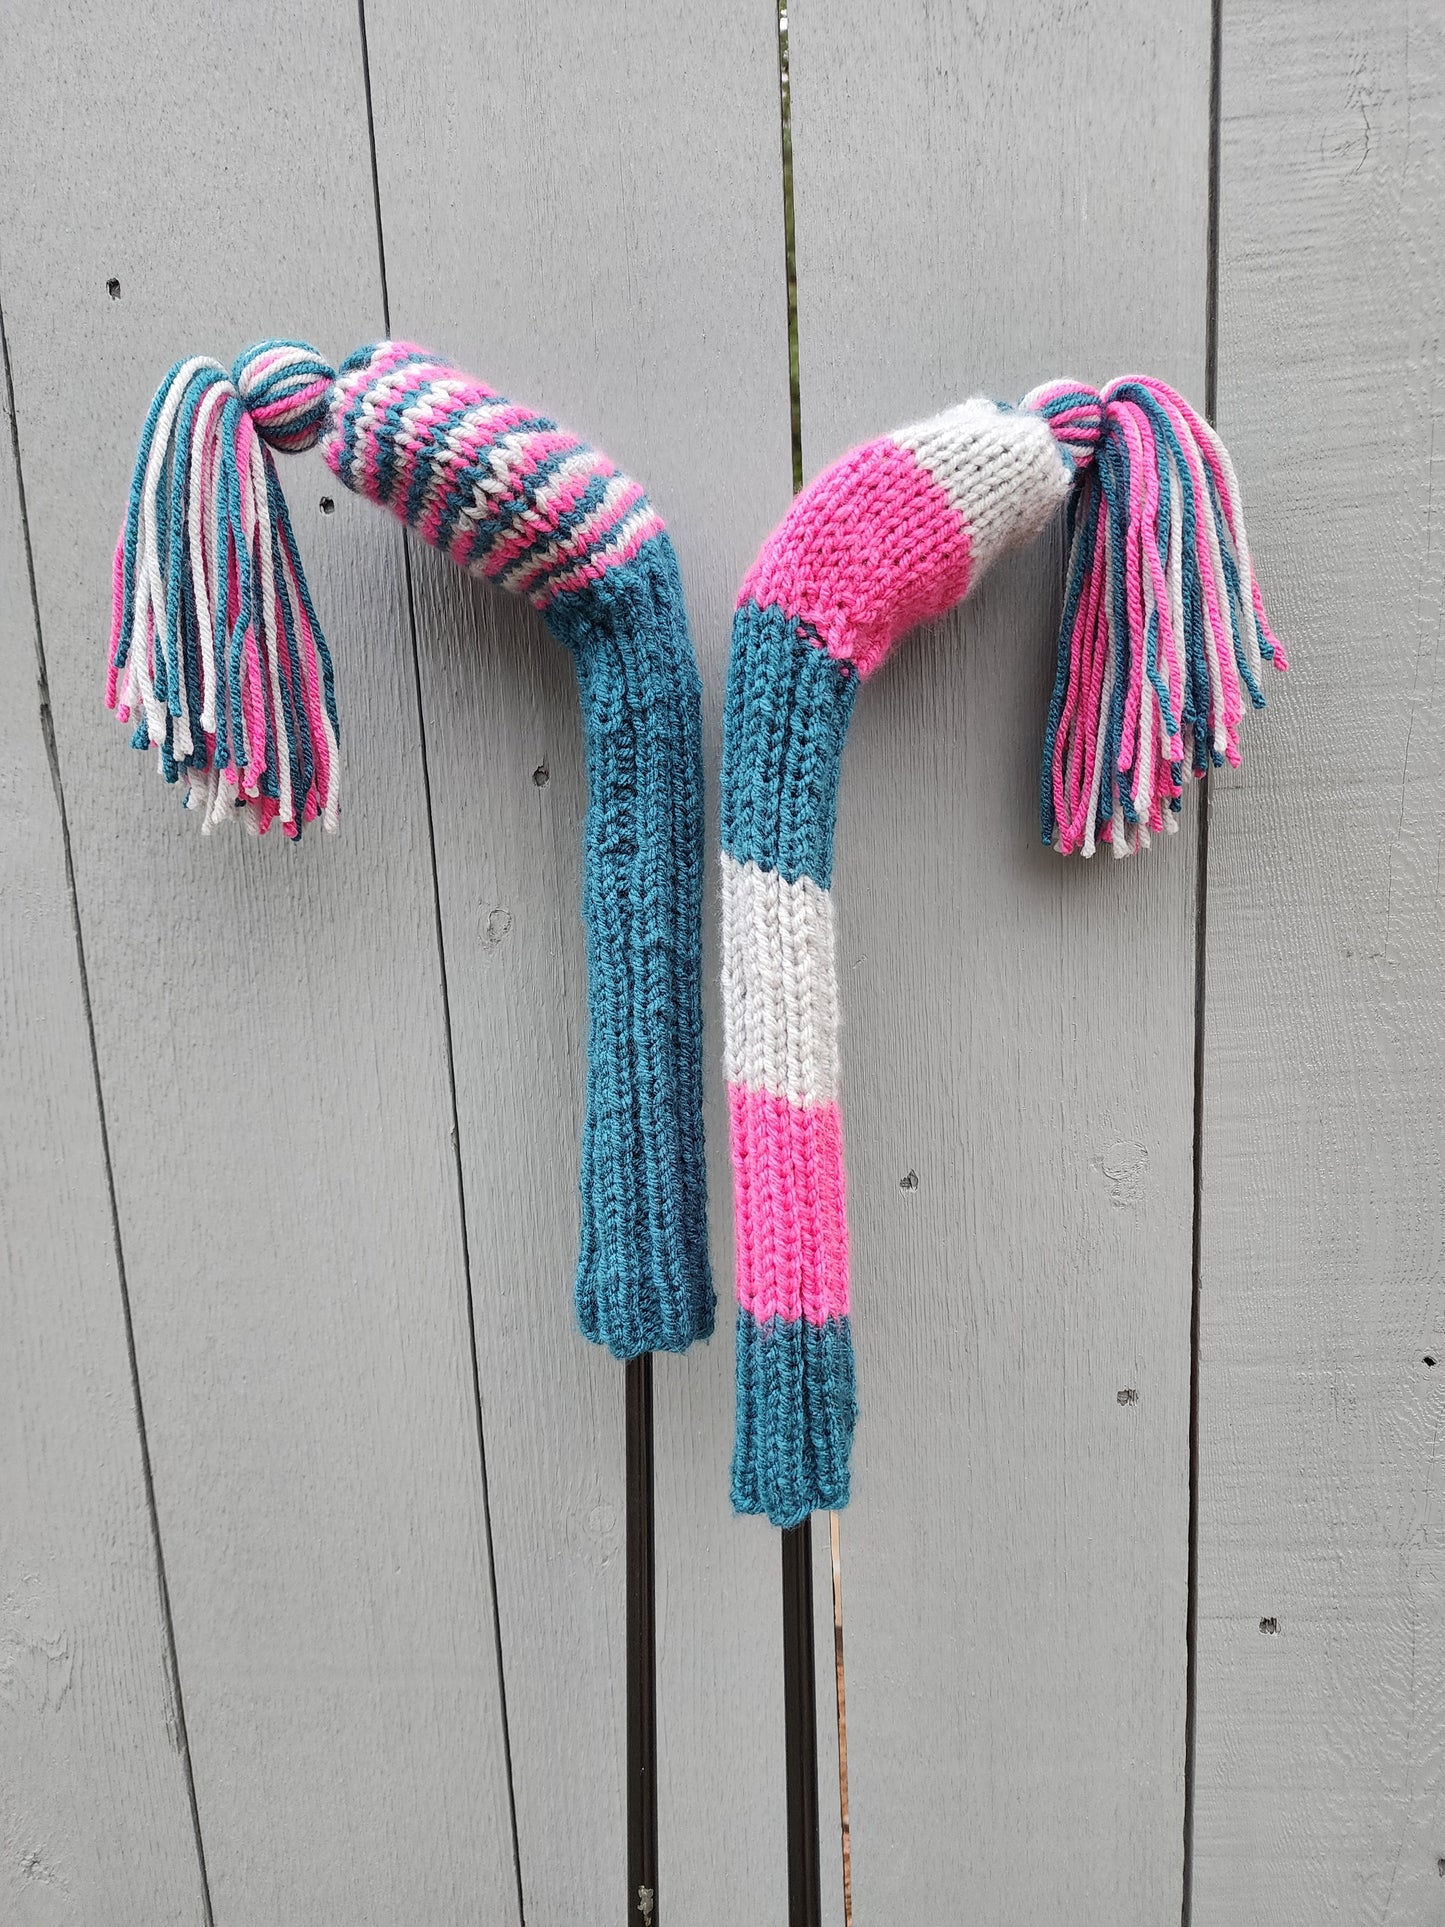 Two Golf Club Head Covers Retro-Vintage Blue, Pink & White with Tassels for Drivers, Woods - Austinknittylimits